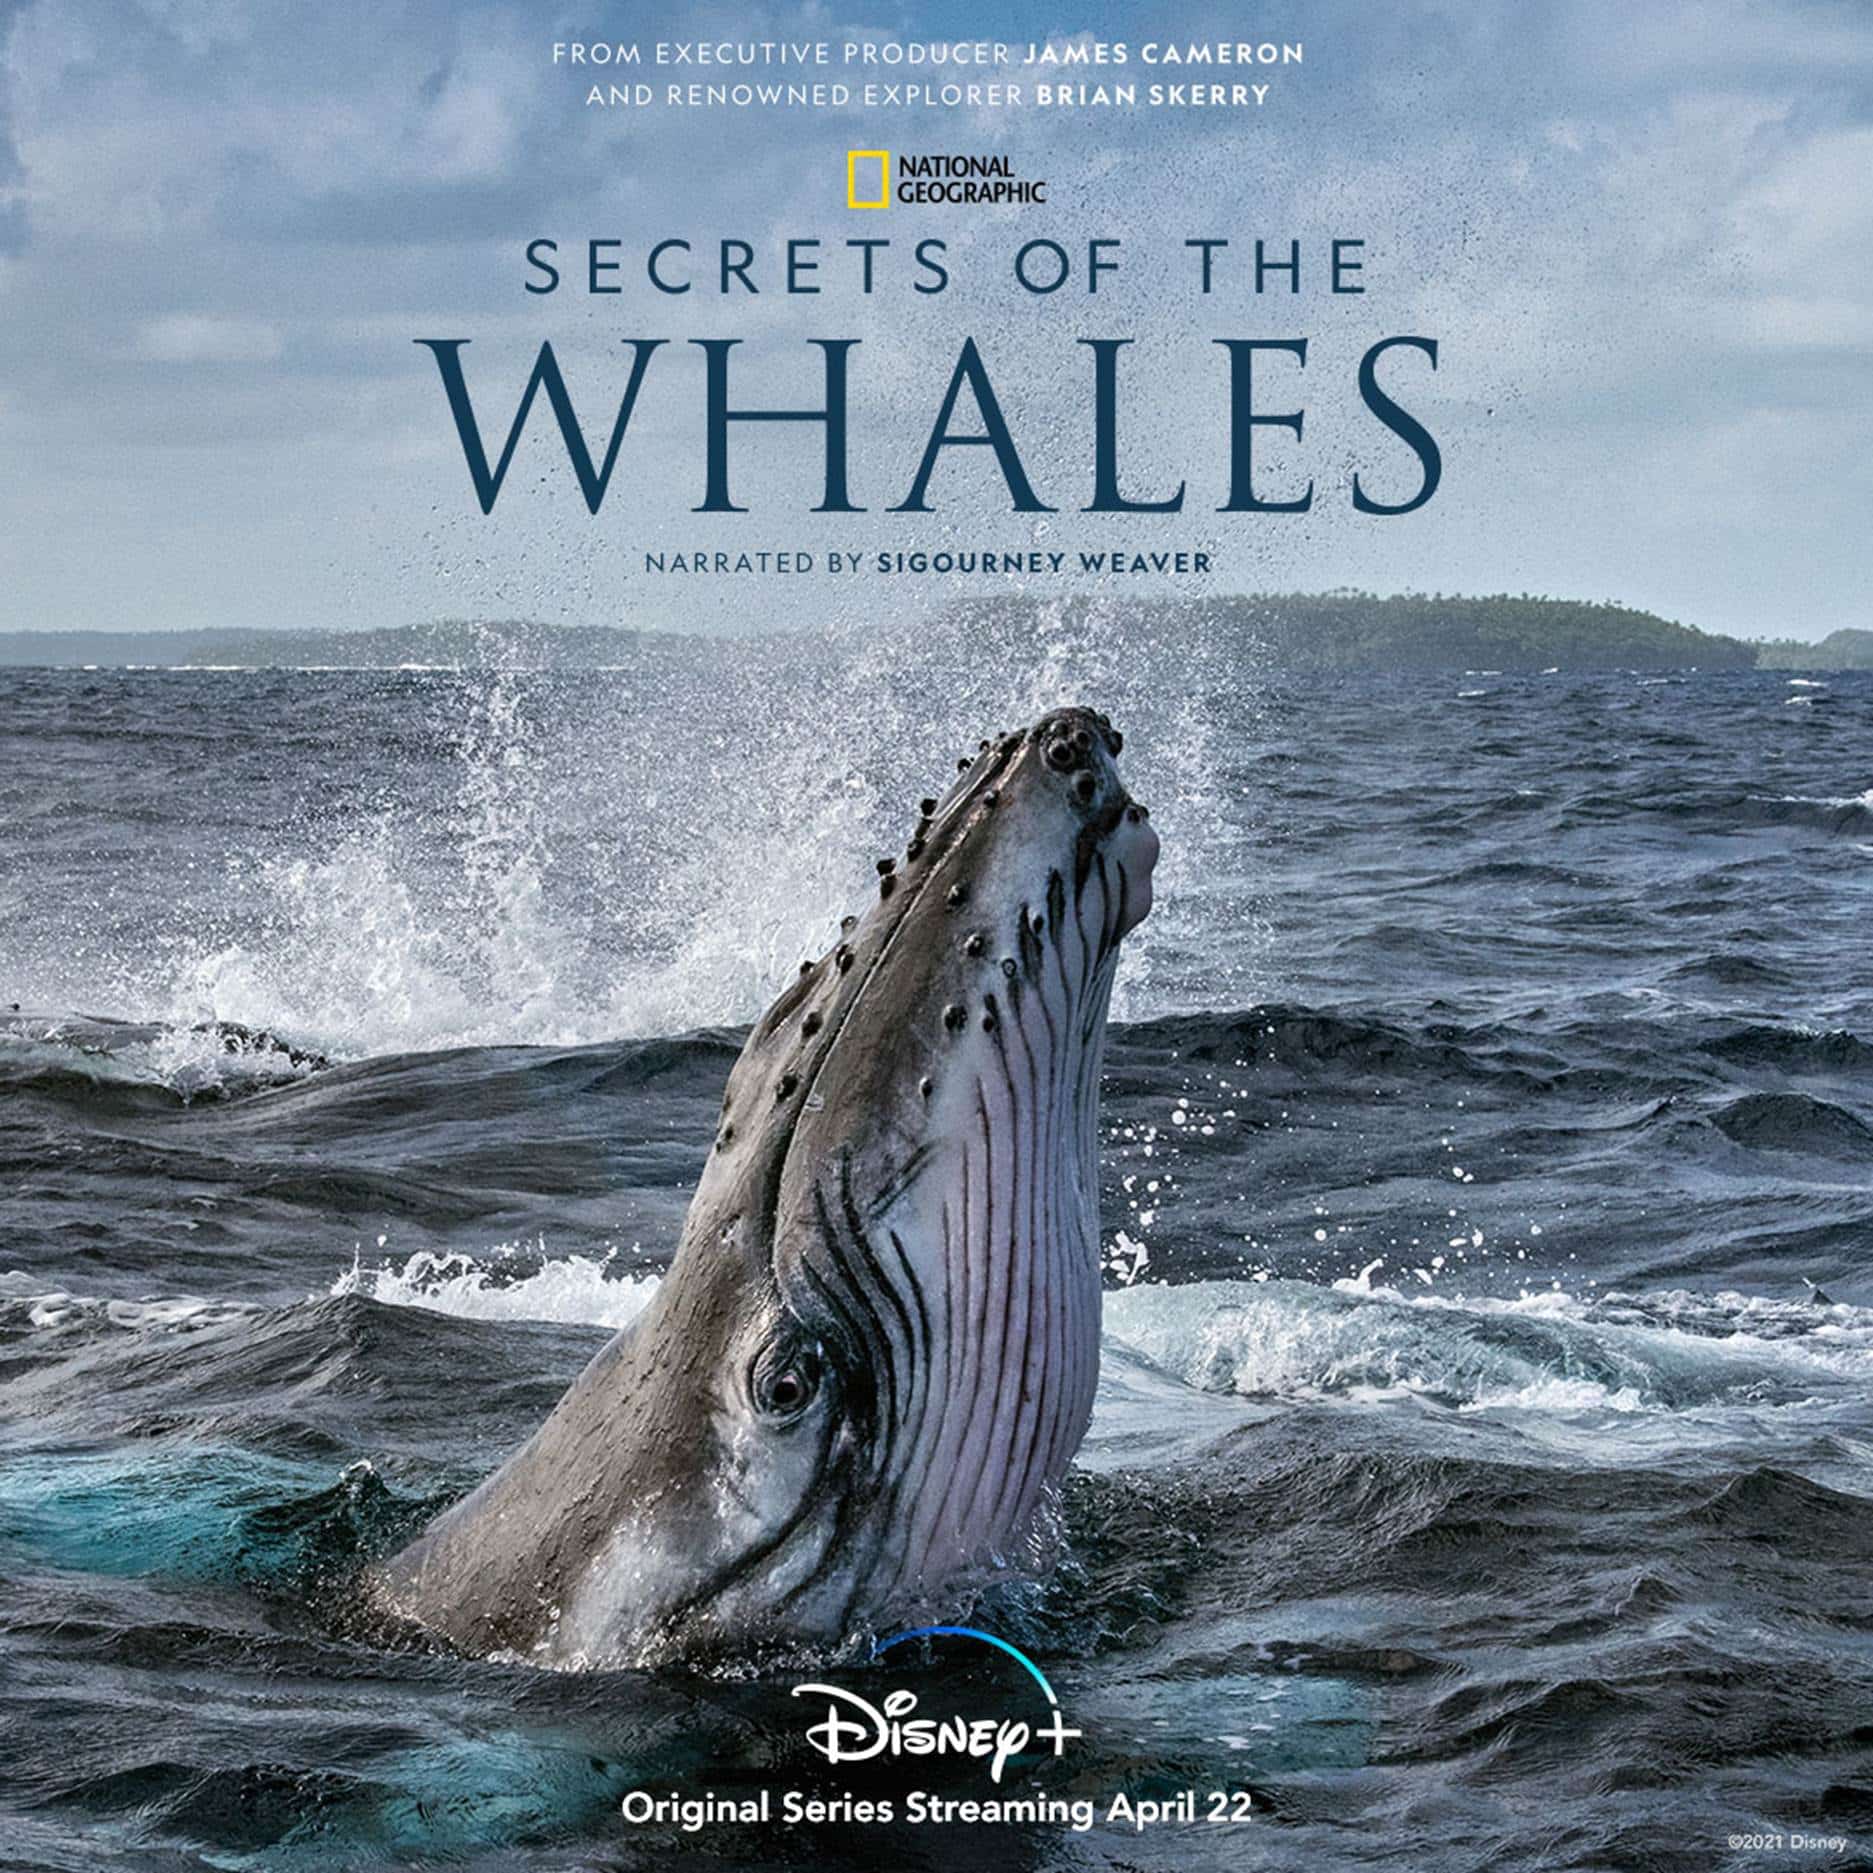 What to Watch: Secrets of the Whales